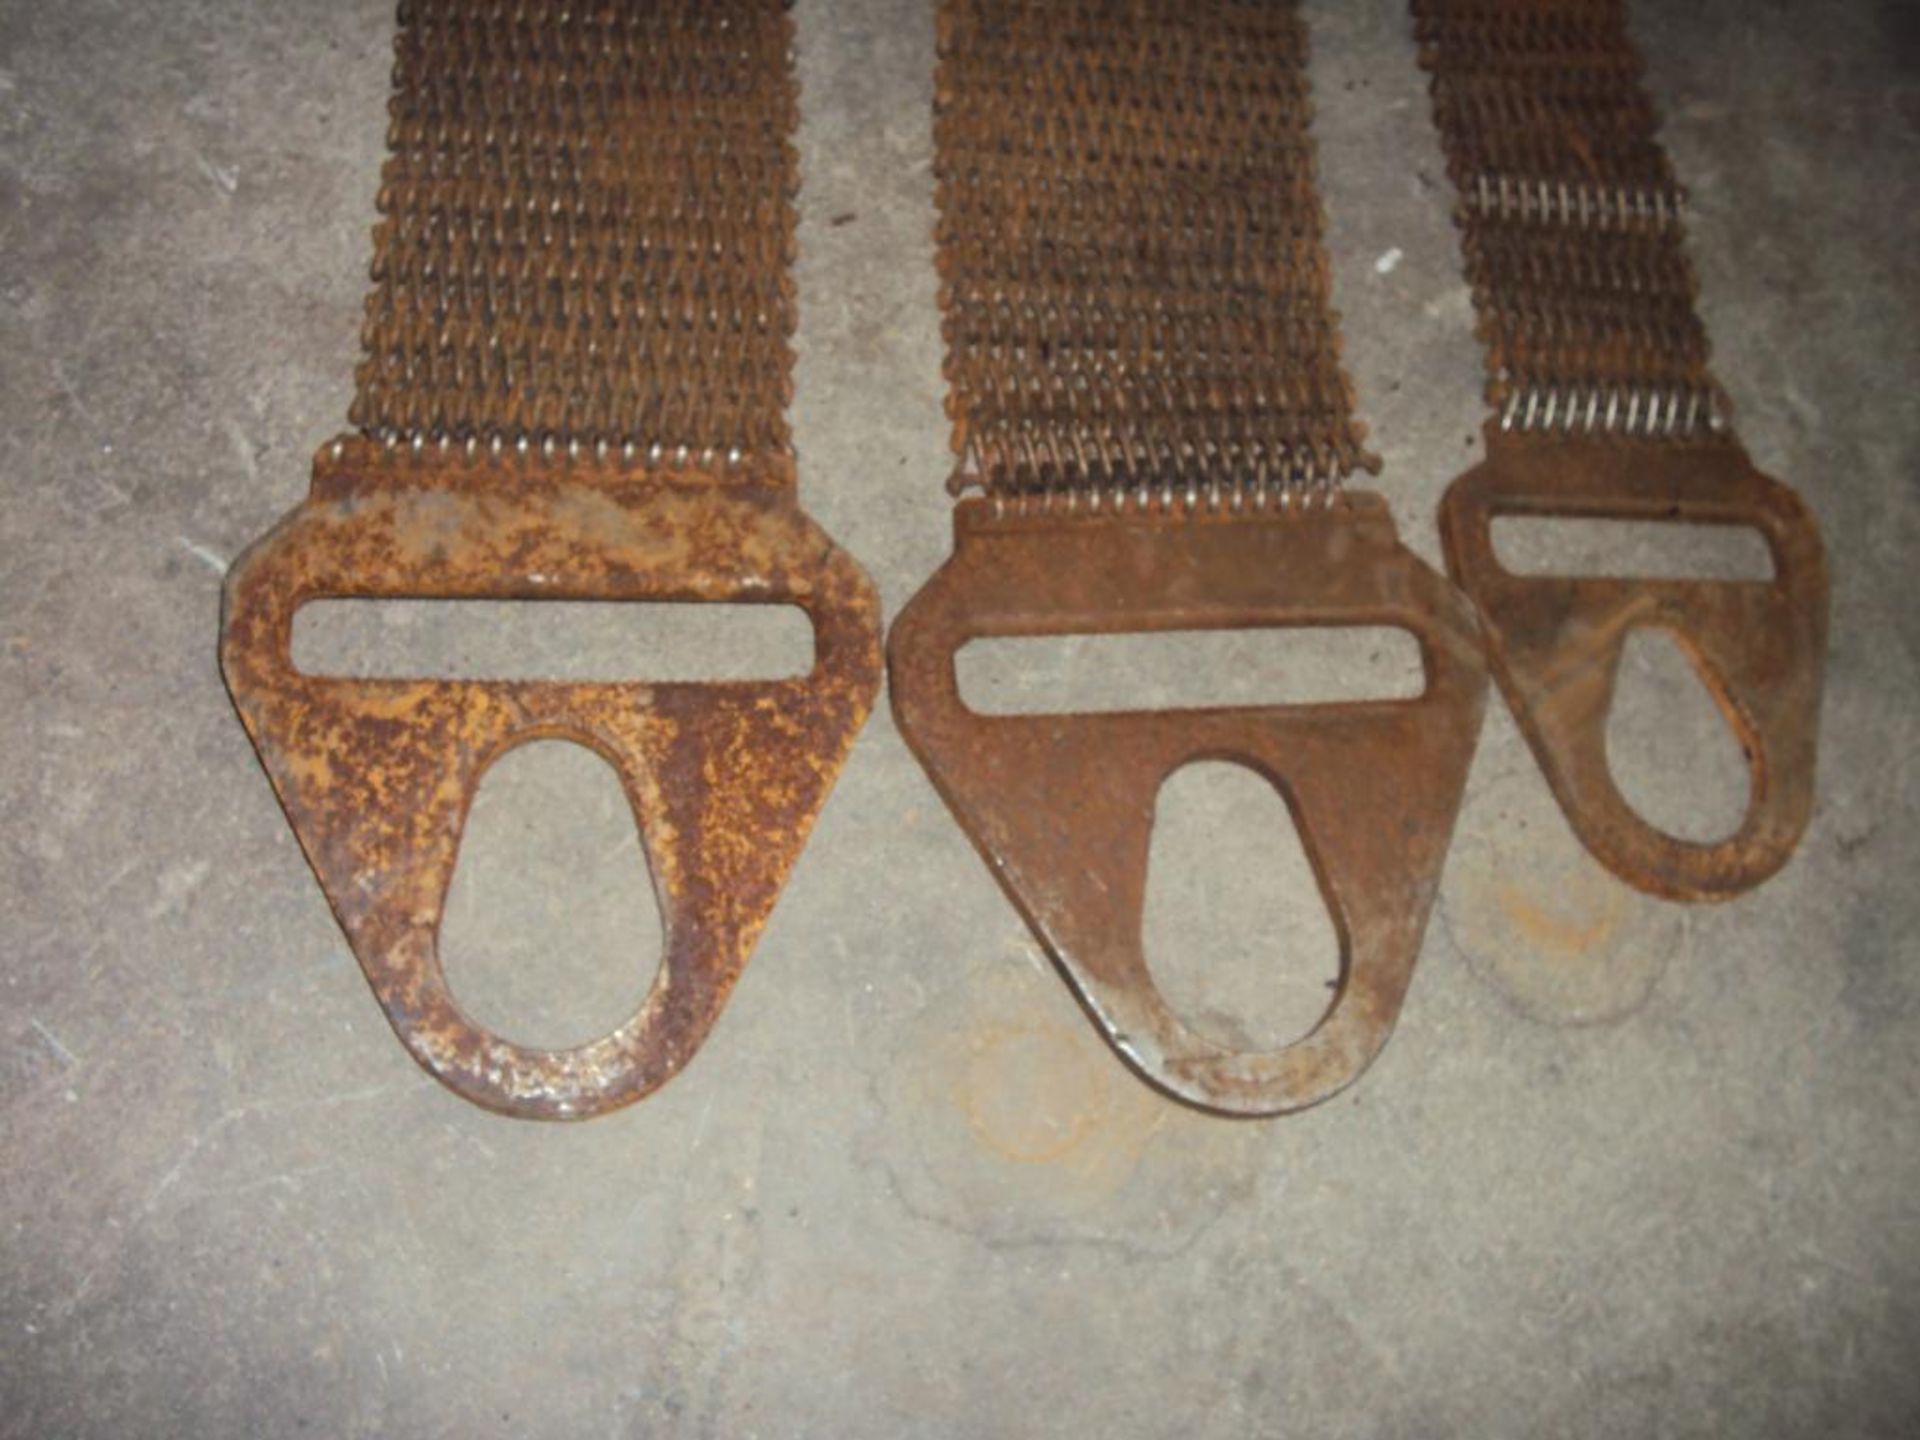 Lot of 3 Wire Mesh Lifting Sling Choker Straps - Image 2 of 4